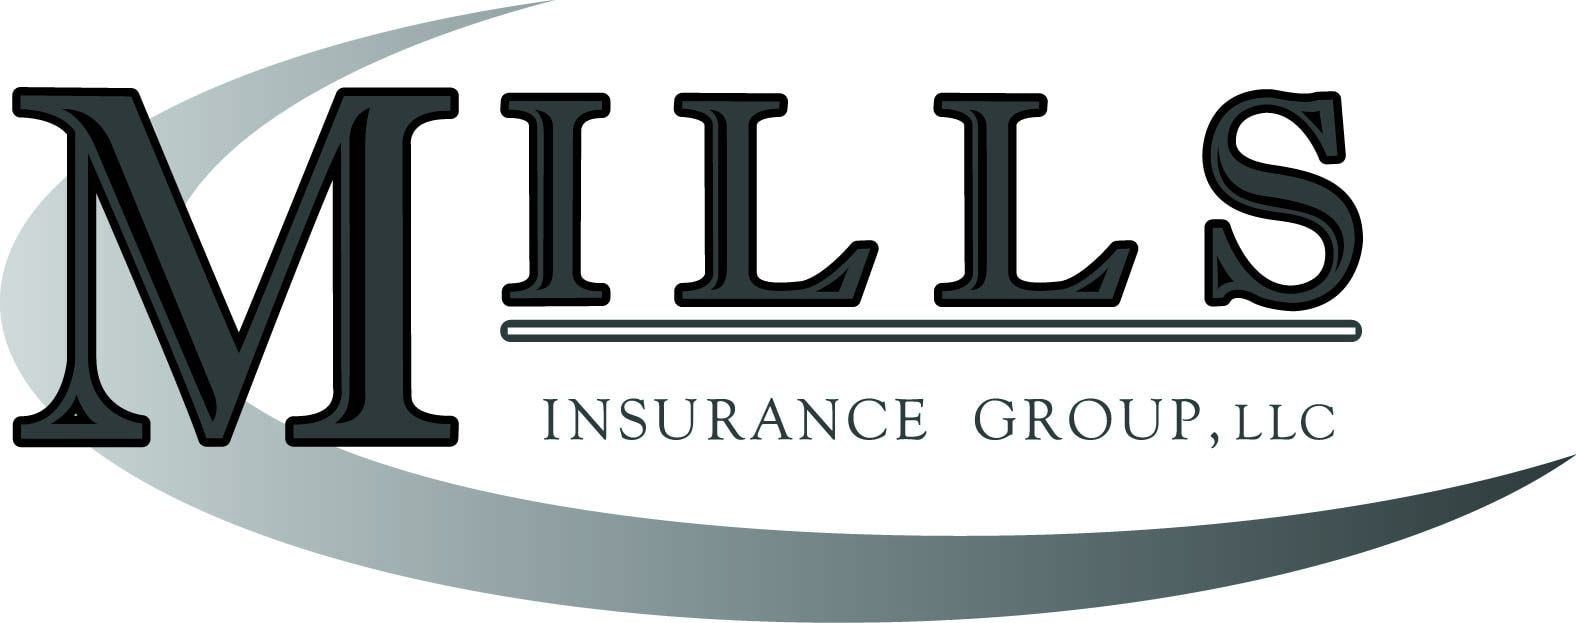 Mills Insurance group specializes in commercial lines, but services both personal and commercial accounts.